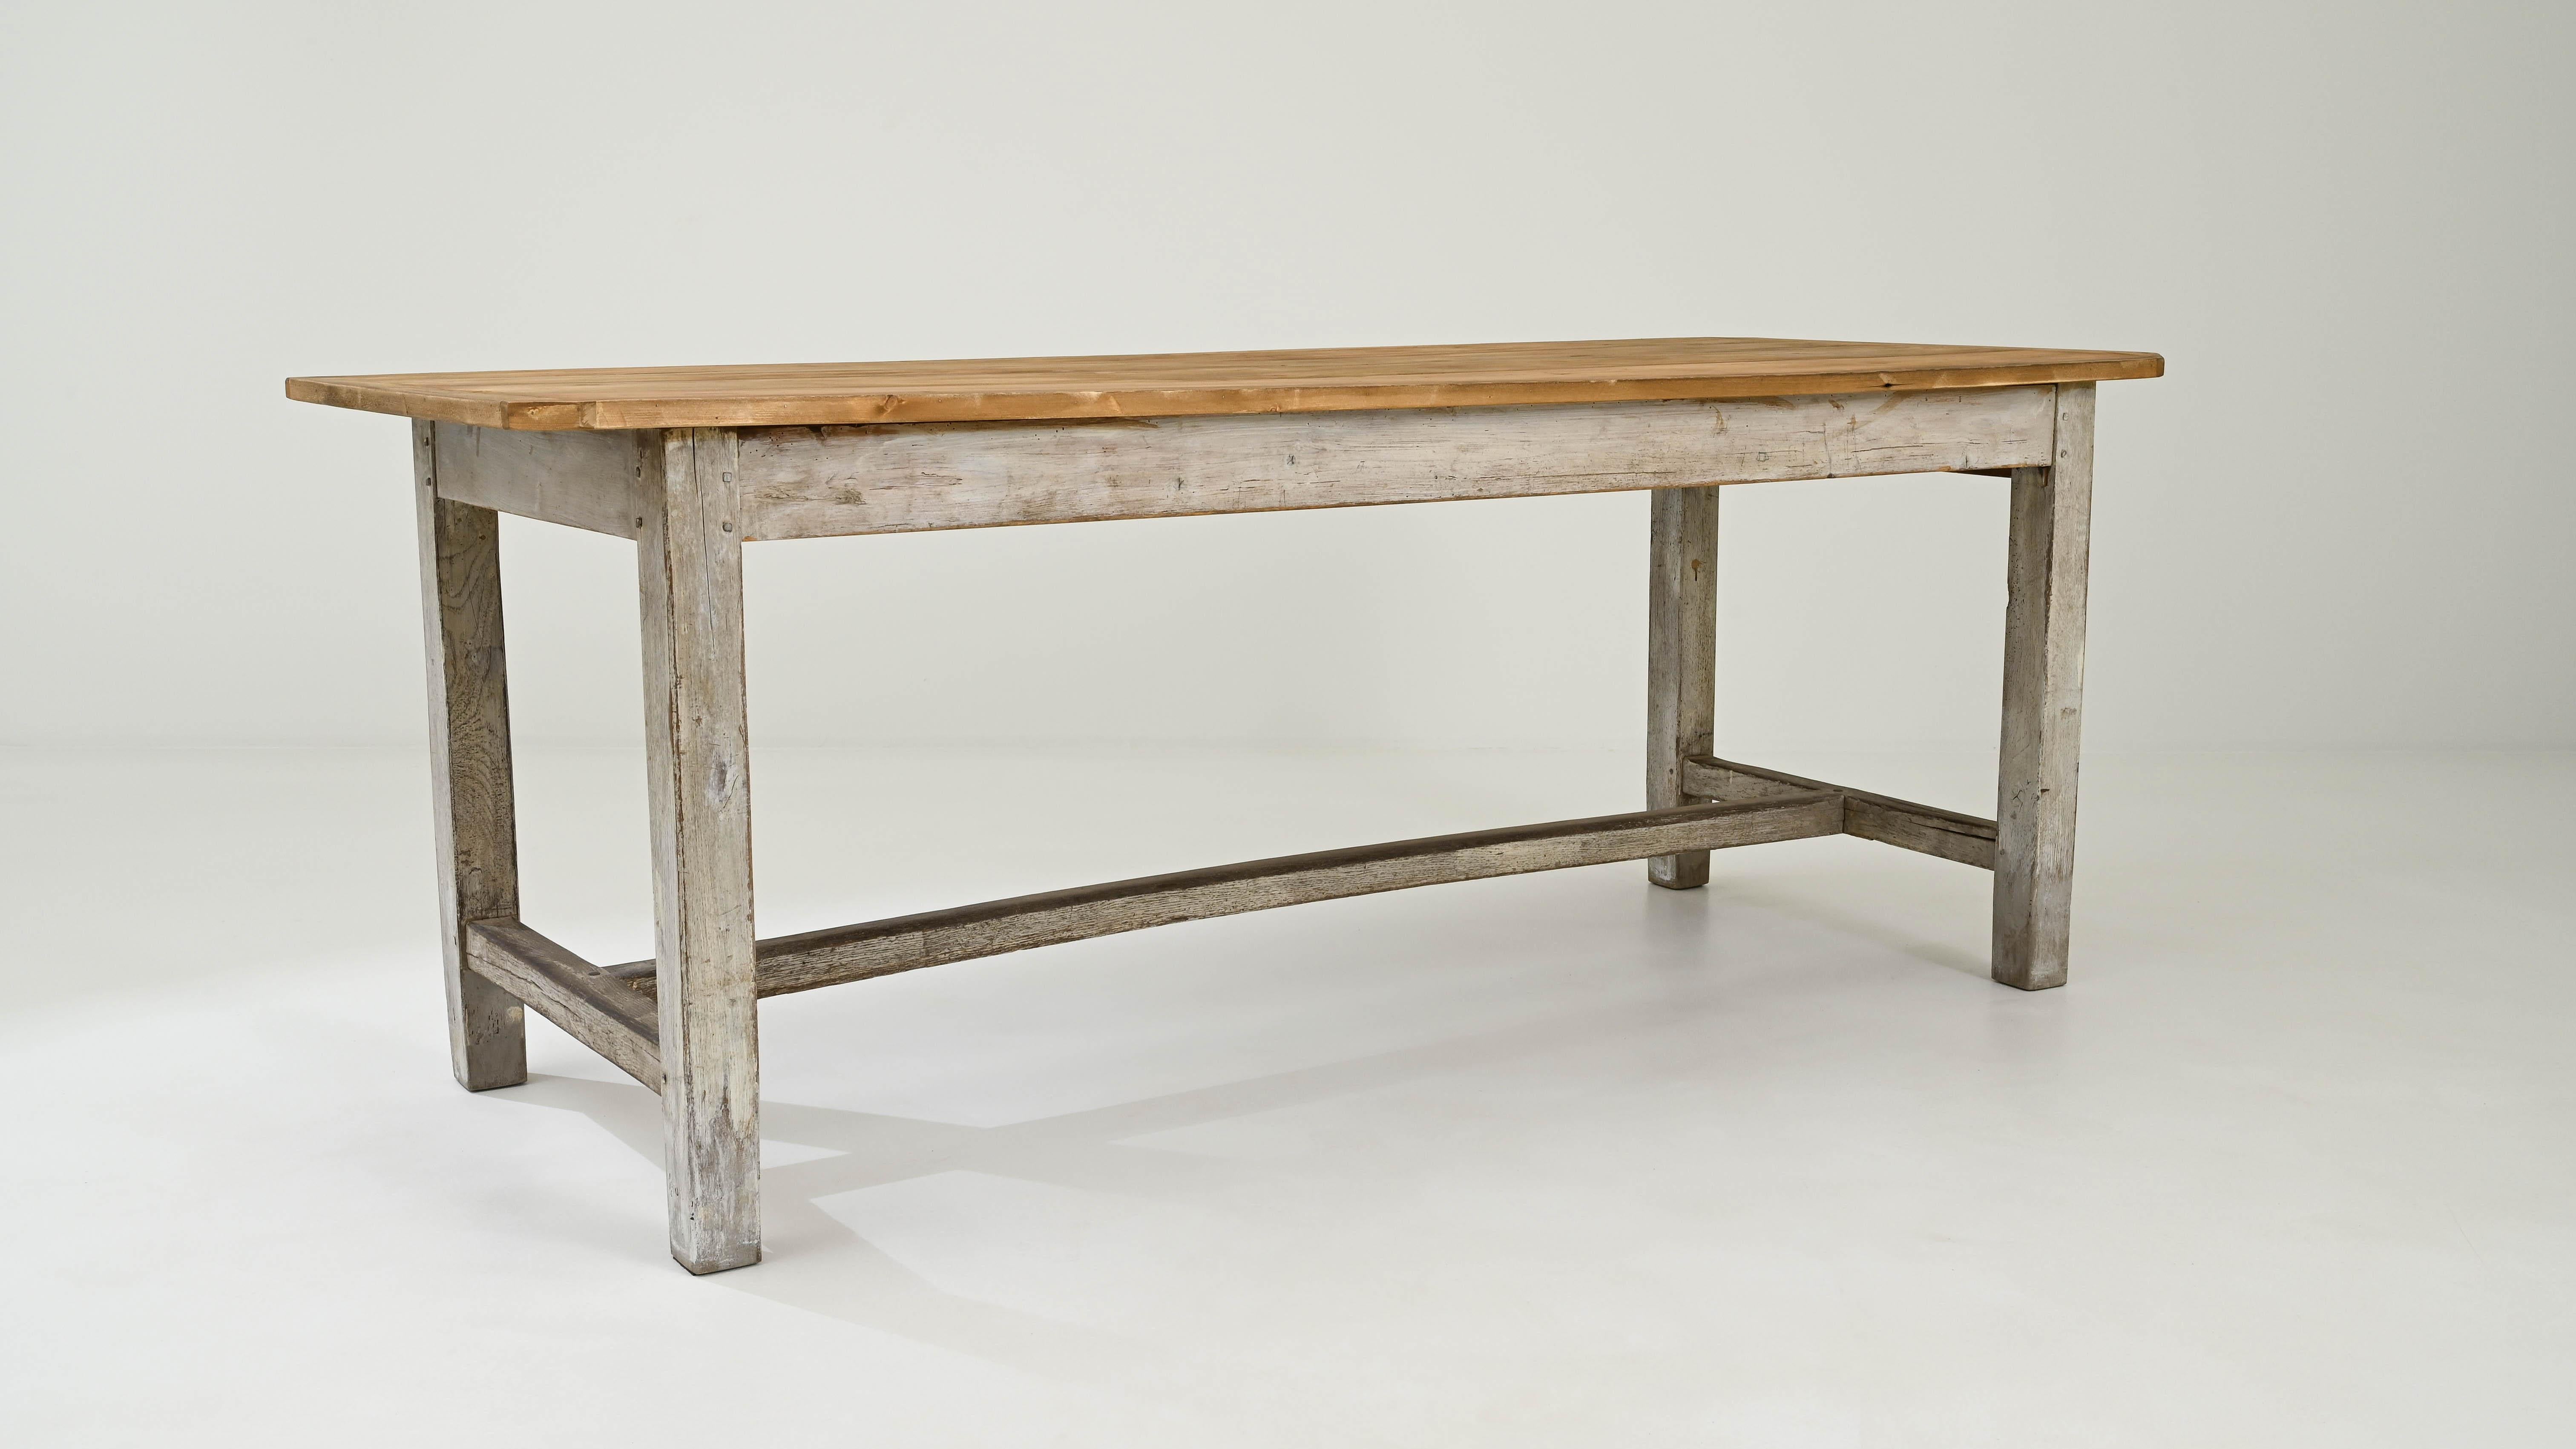 This early 20th Century French Wooden Table effortlessly merges timeless design with a unique blend of light wood throughout, culminating in a distinctive tabletop with a warm, rich finish. Crafted with meticulous attention to detail, the table